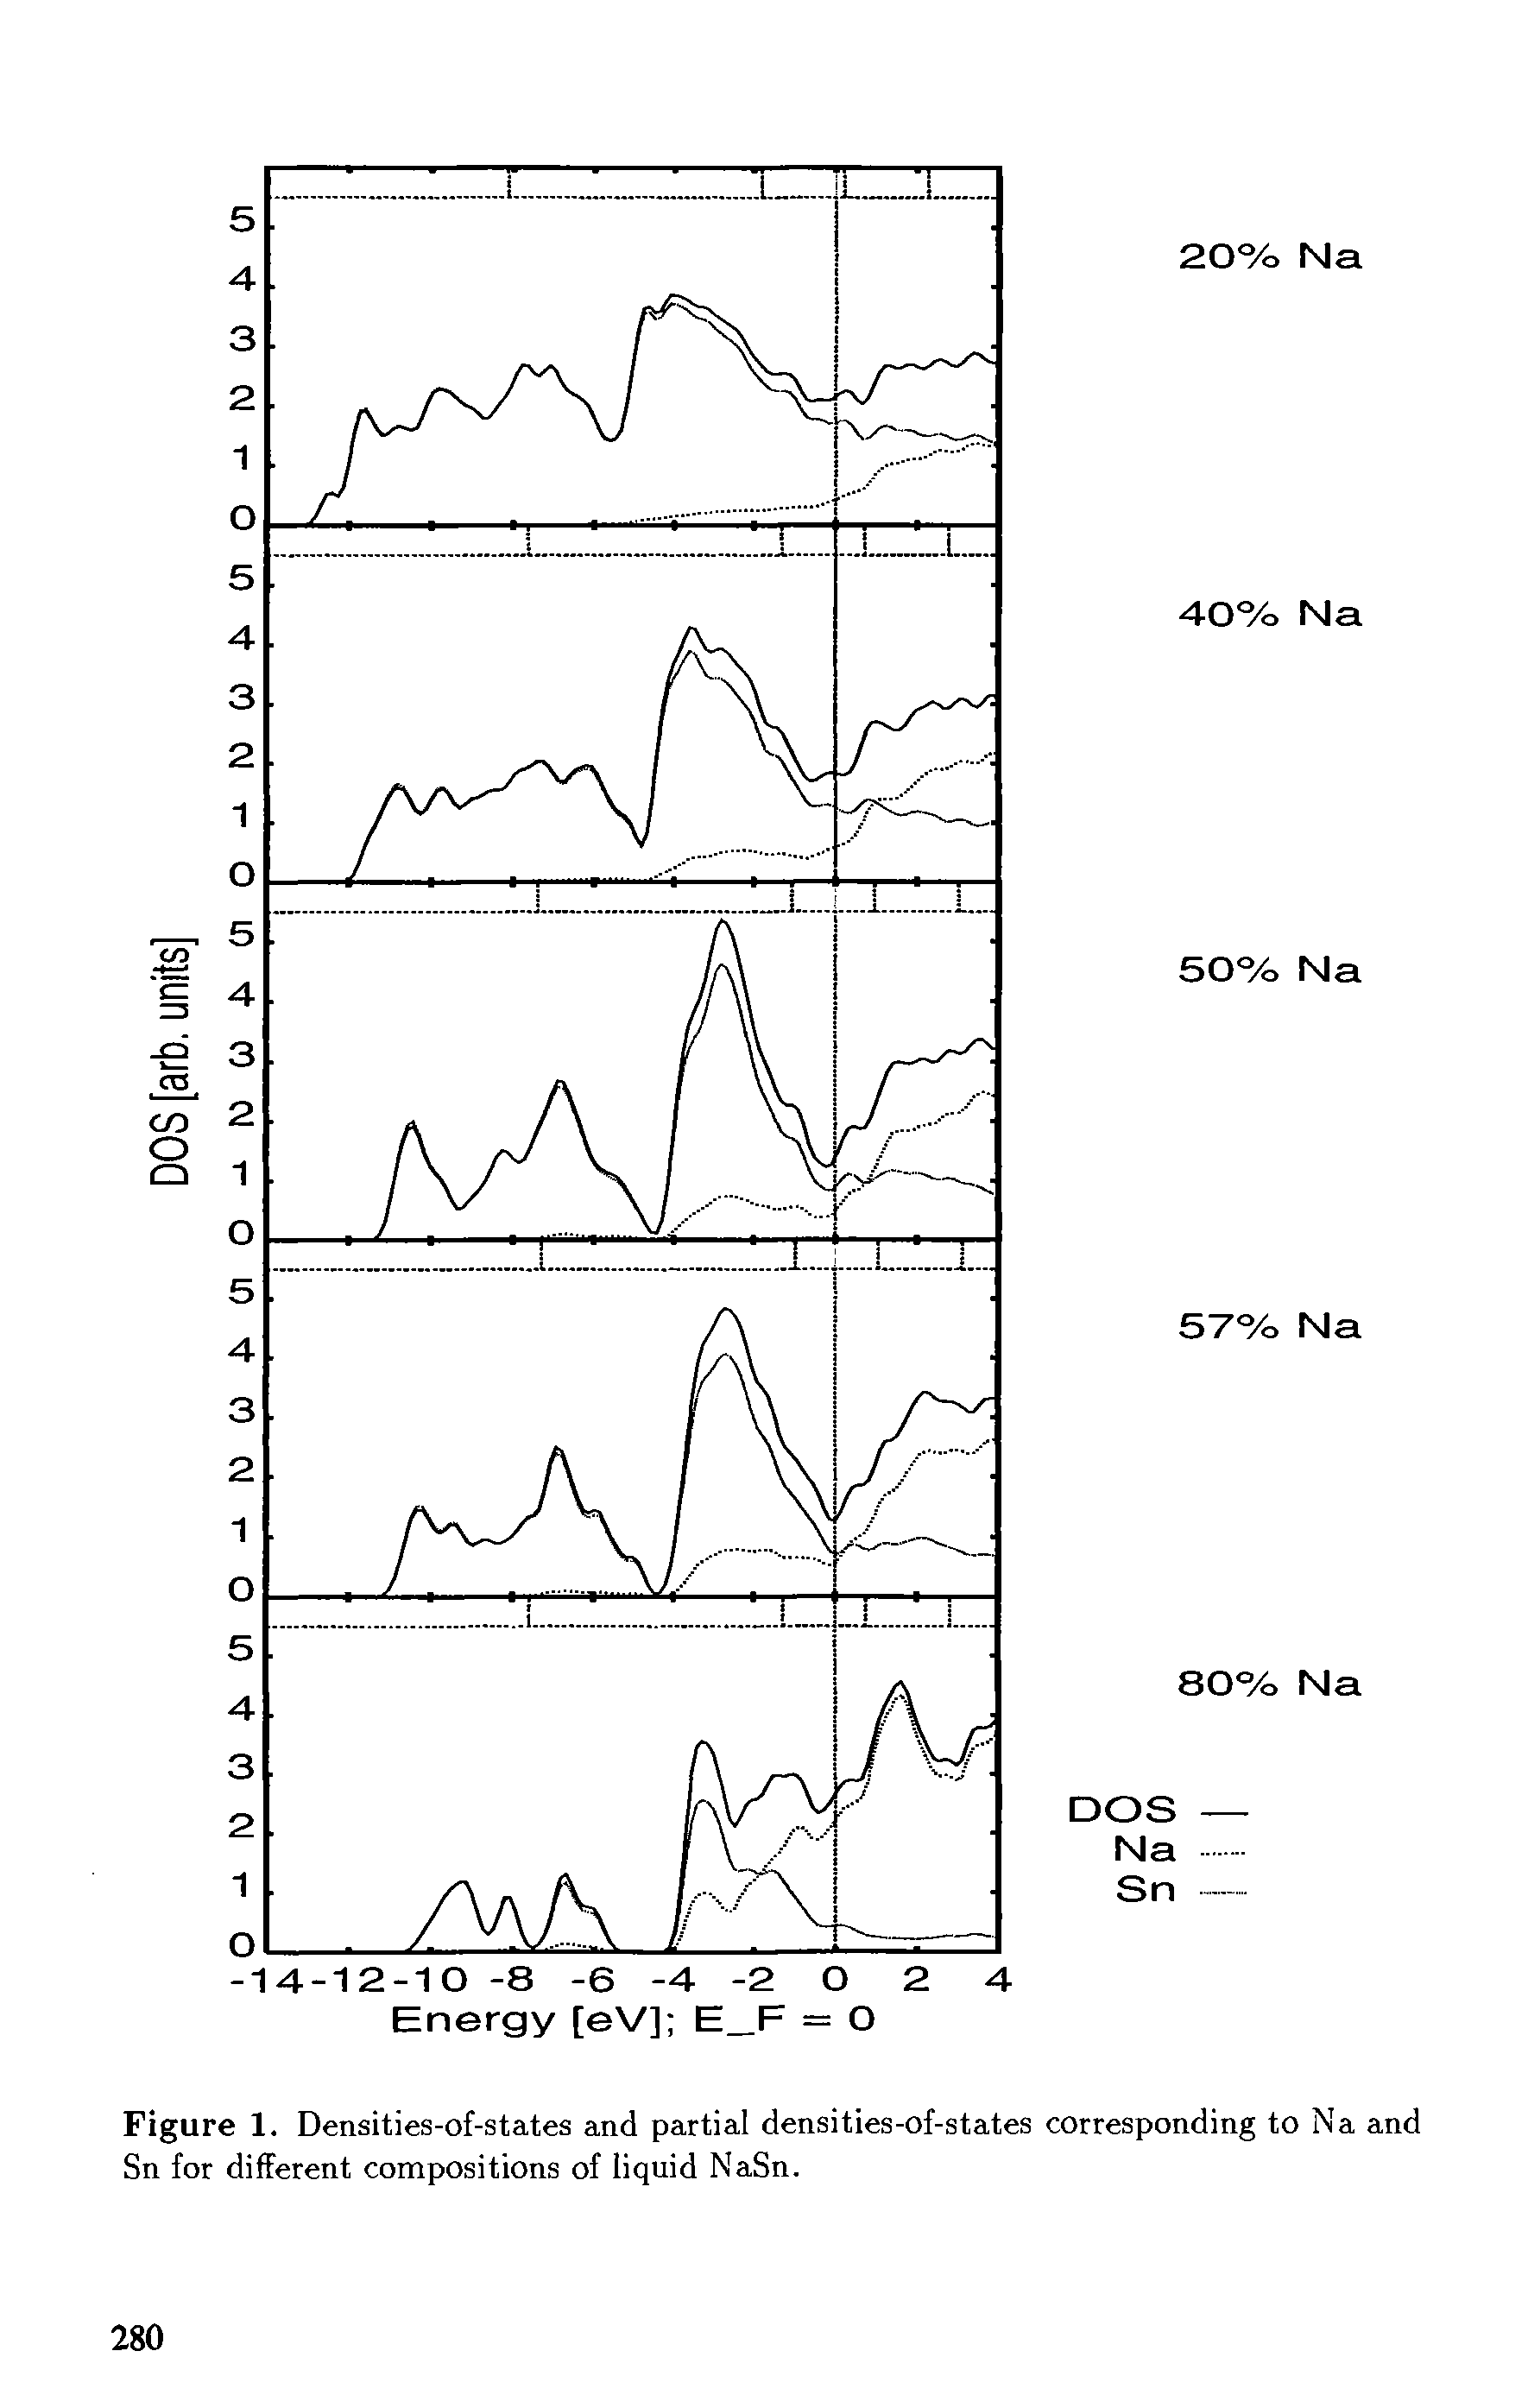 Figure 1. Densities-of-states and partial densities-of-states corresponding to Na and Sn for different compositions of liquid NaSn.